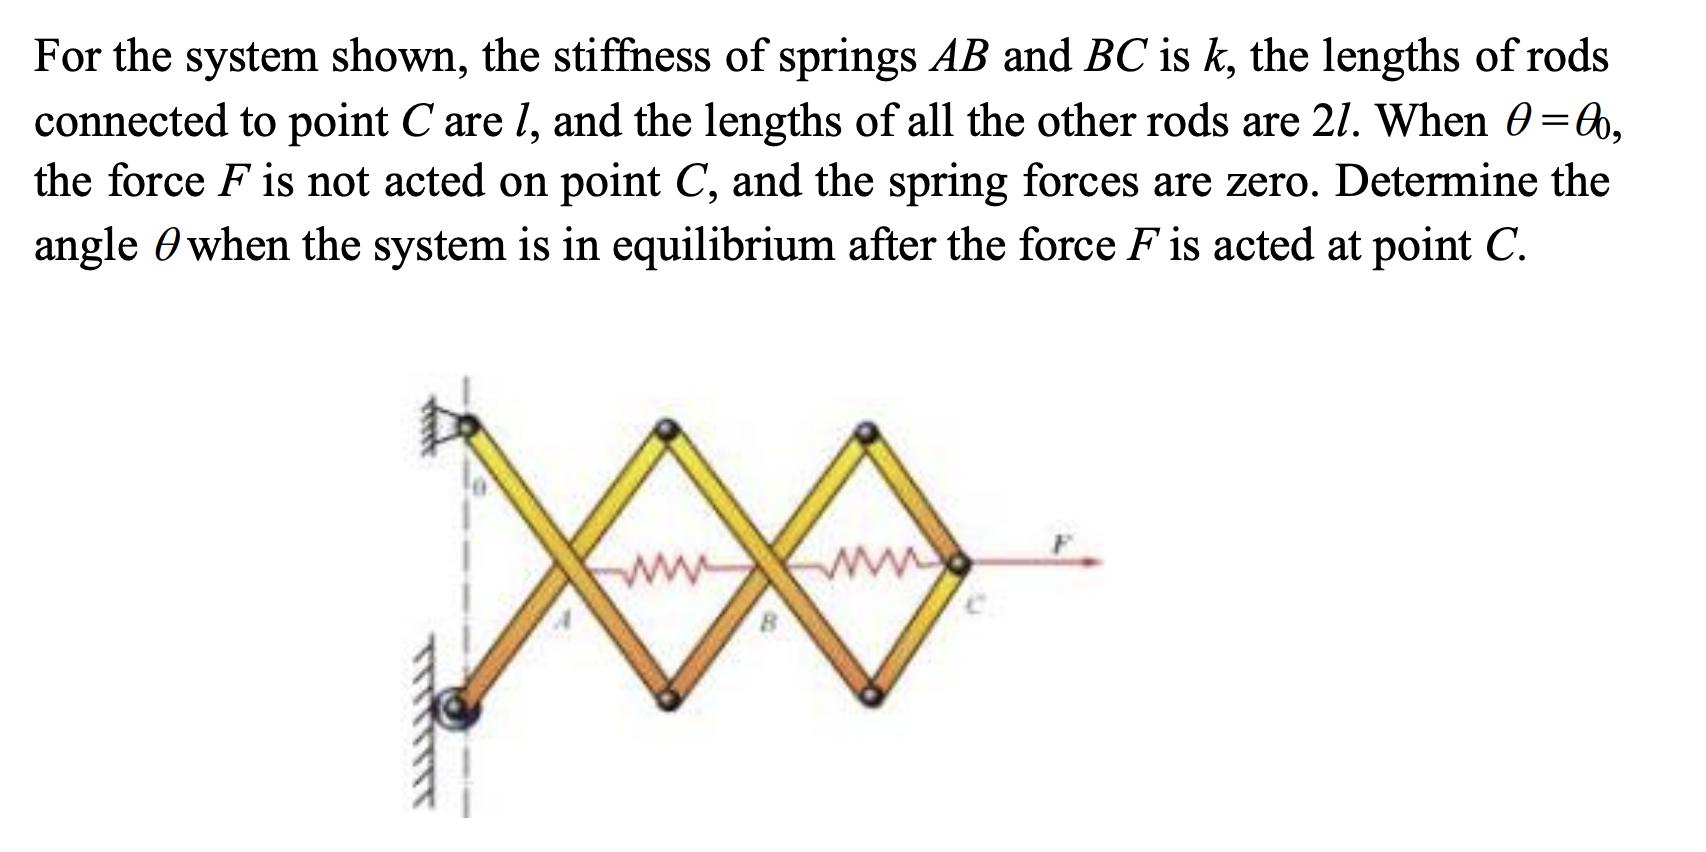 For the system shown, the stiffness of springs AB and BC is k, the lengths of rods connected to point C are l, and the length